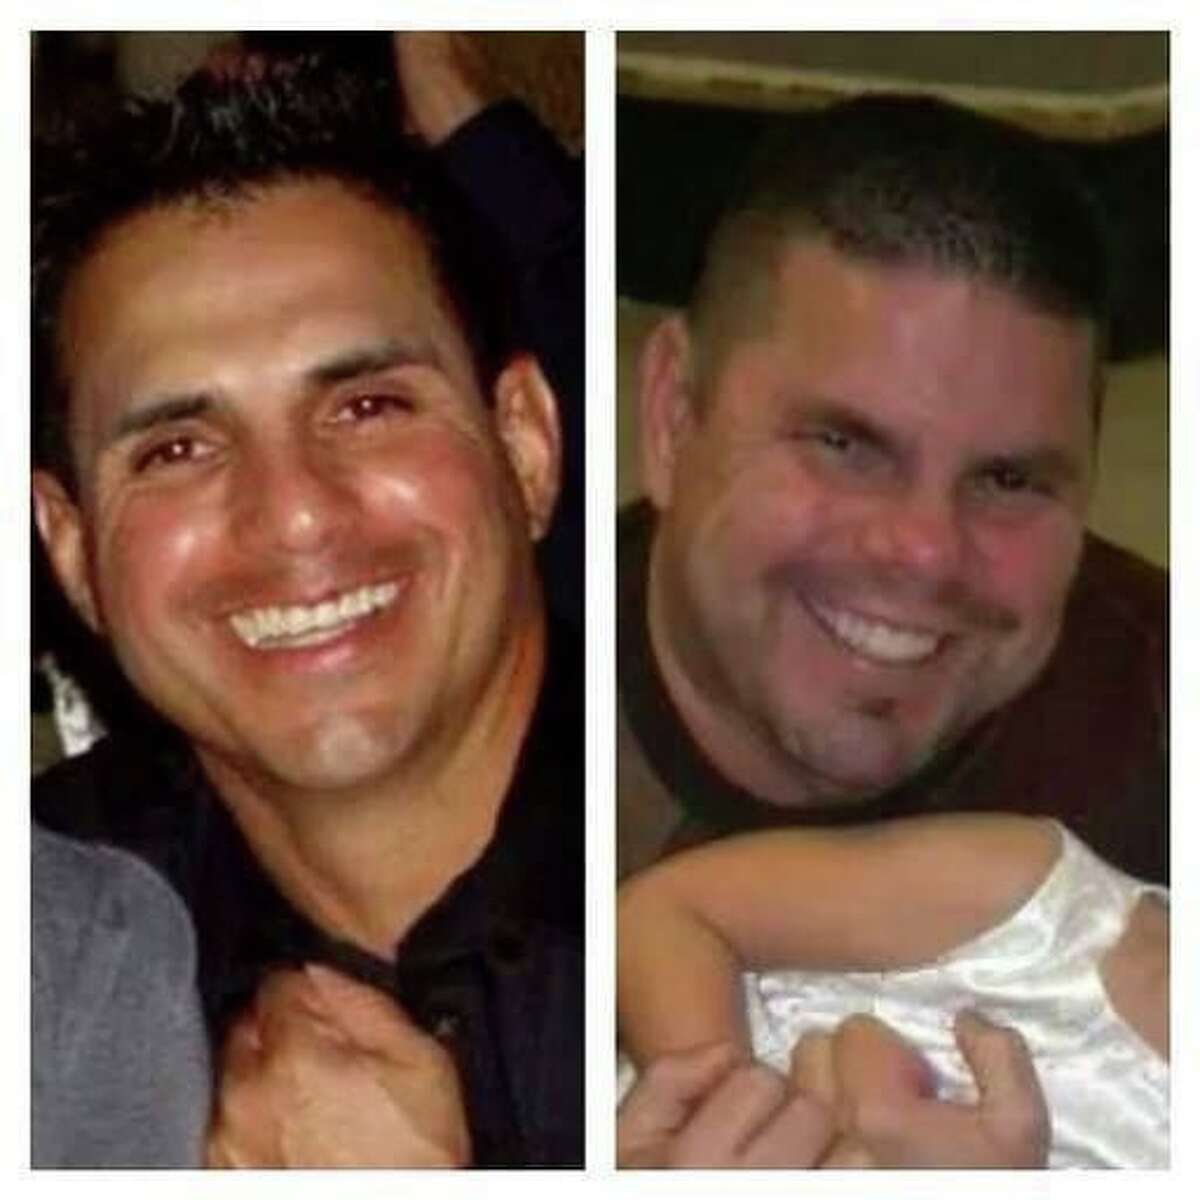 DuPont employees and brothers, Robert Tisnado, left, 39 and Gilbert "Gibby" Tisnado, right, 48, died in the DuPont La Porte chemical leak Saturday. (Family Photos) DuPont employees and brothers, Robert Tisnado, left, 39 and Gilbert "Gibby" Tisnado, right, 48, died in the DuPont La Porte chemical leak Saturday. (Family Photos)